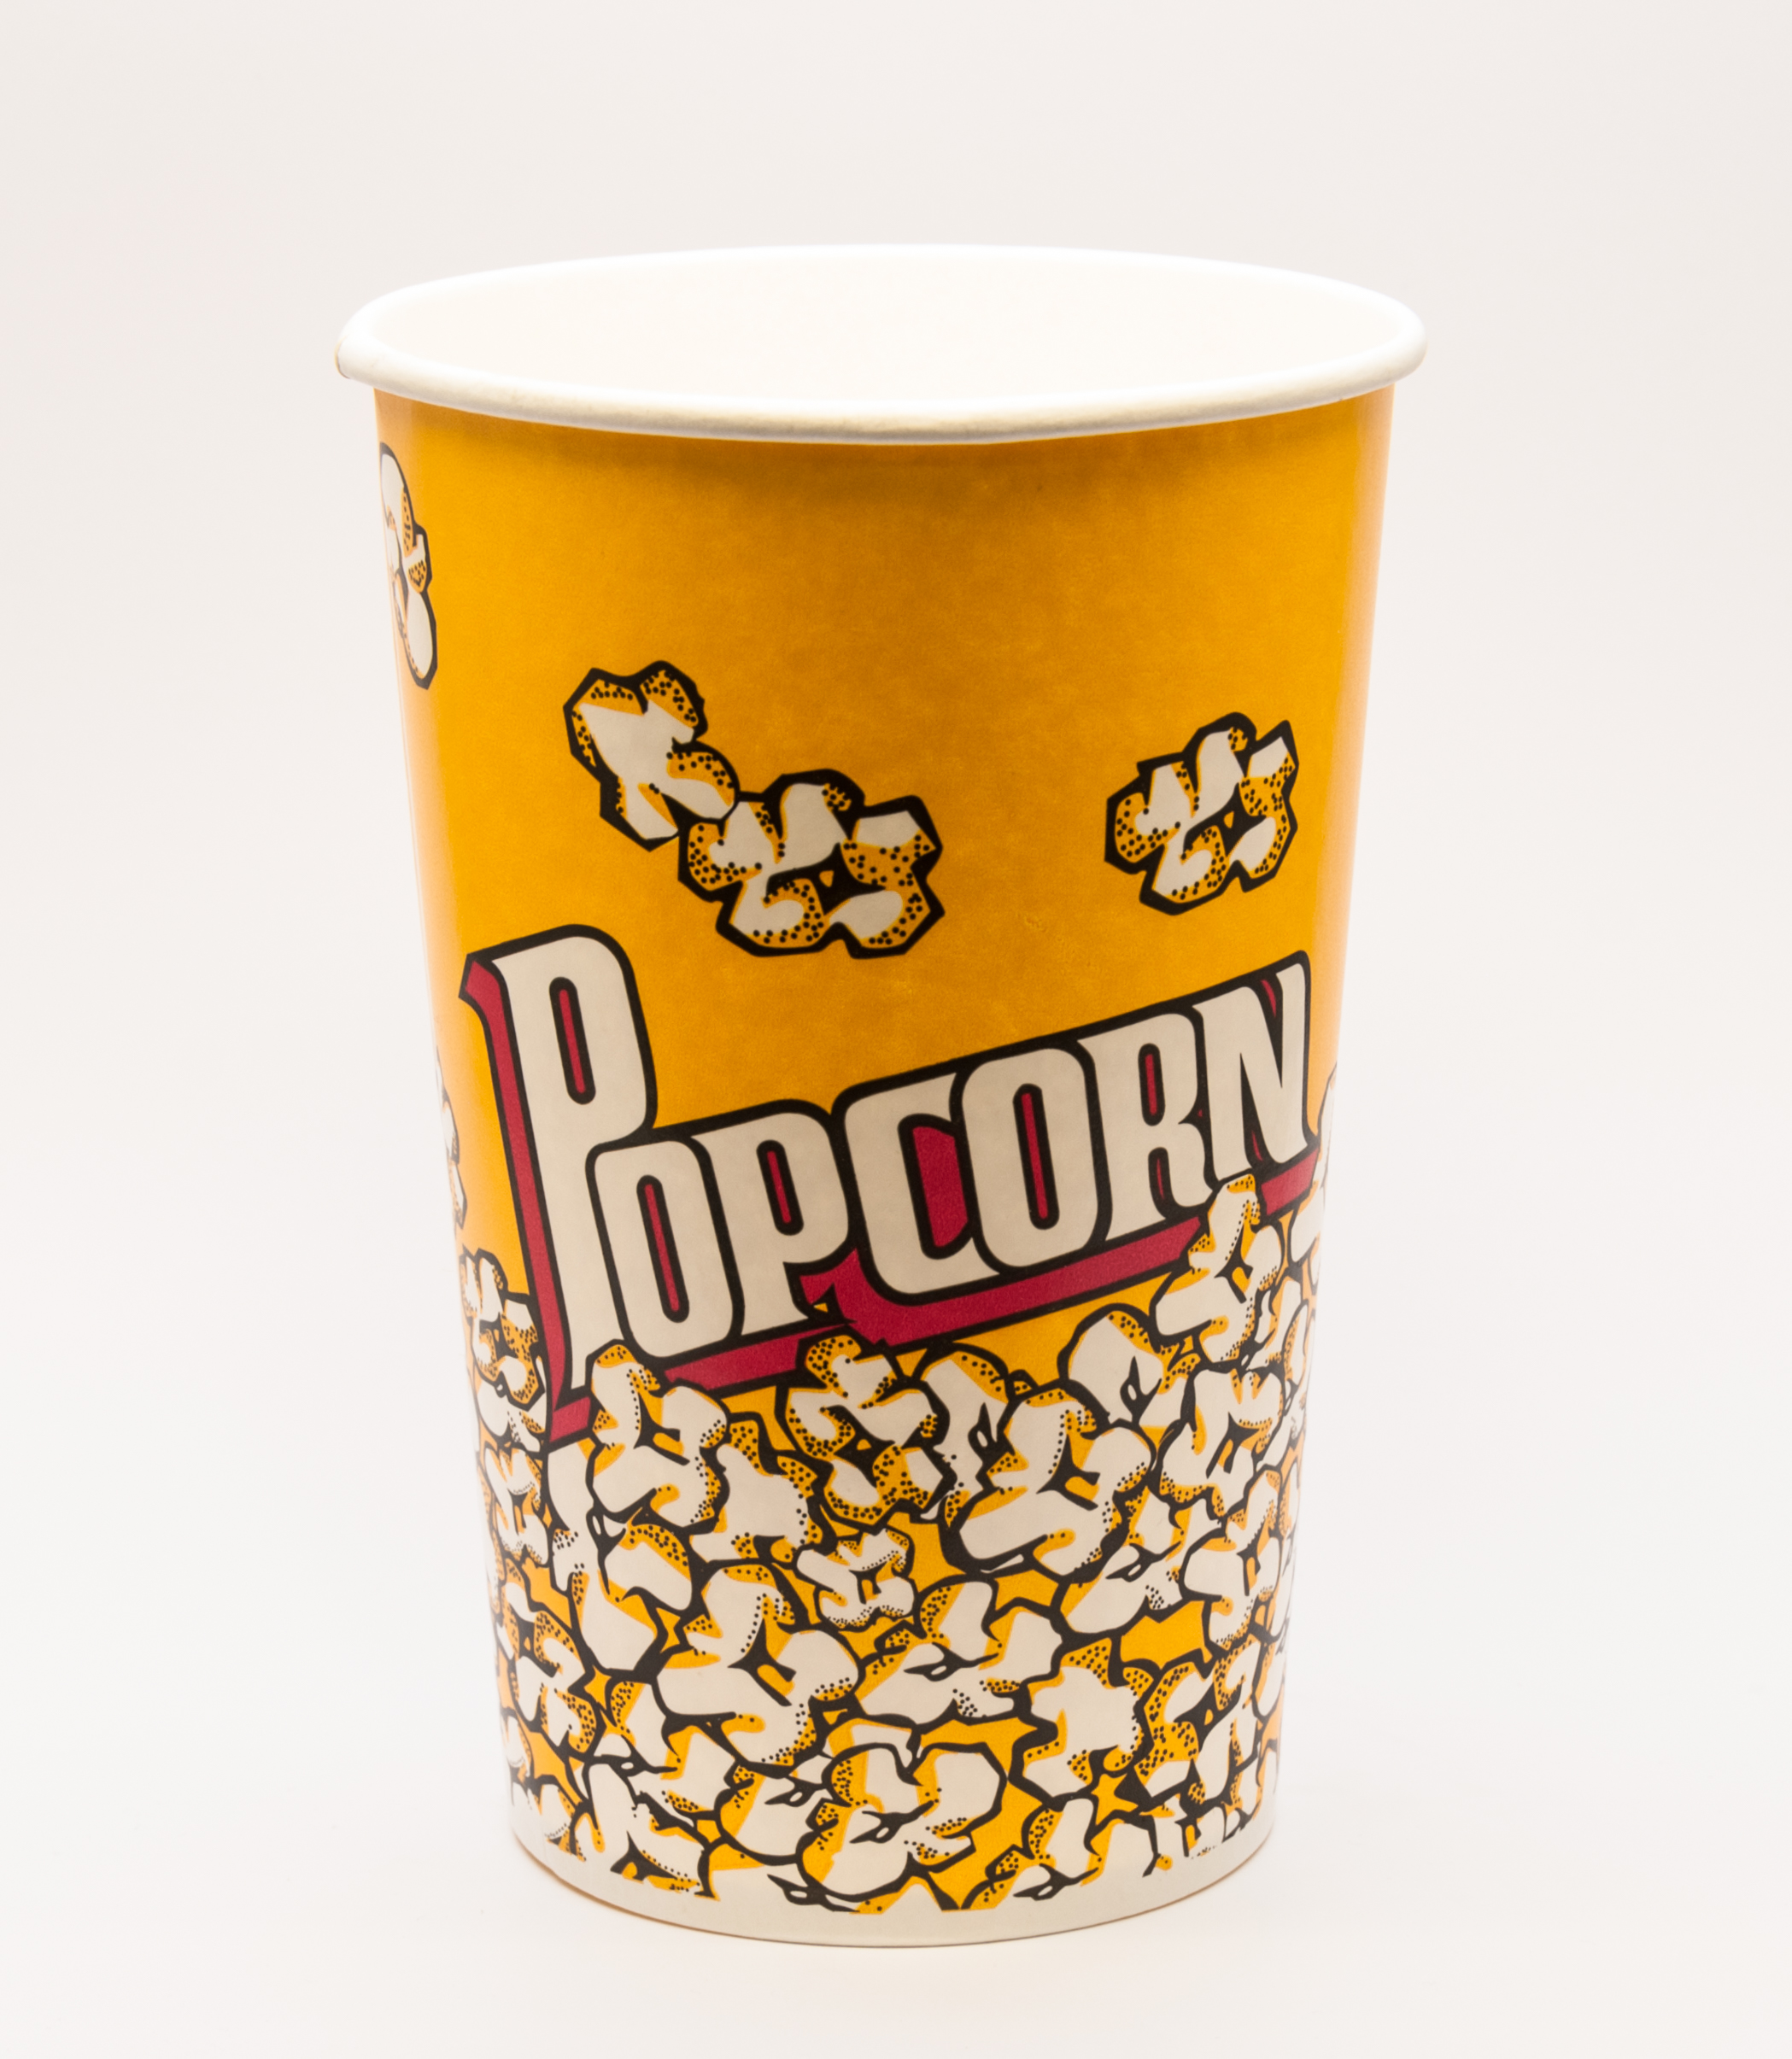 Cock in a bucket of popcorn